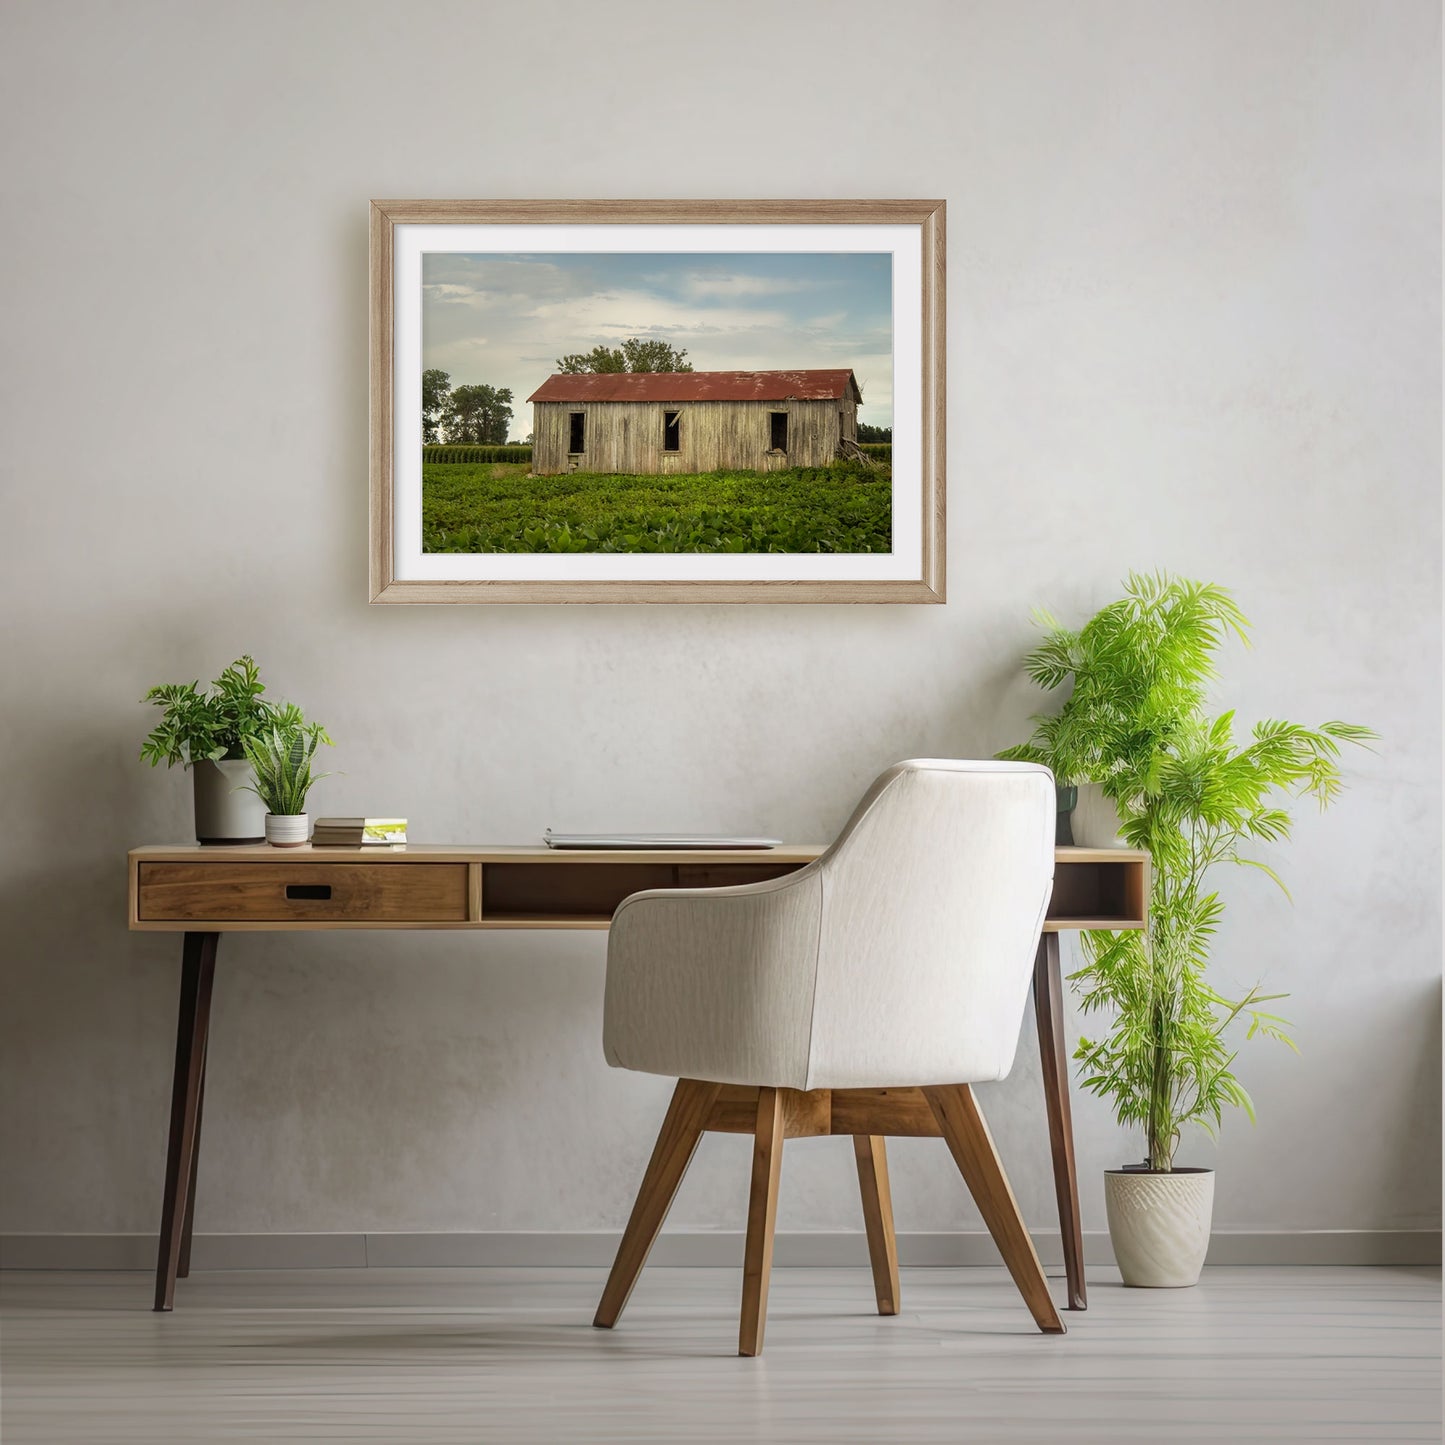 A Mississippi Delta photography print featuring a rustic sharecropper shack, offering a visual narrative of America's agricultural heritage.